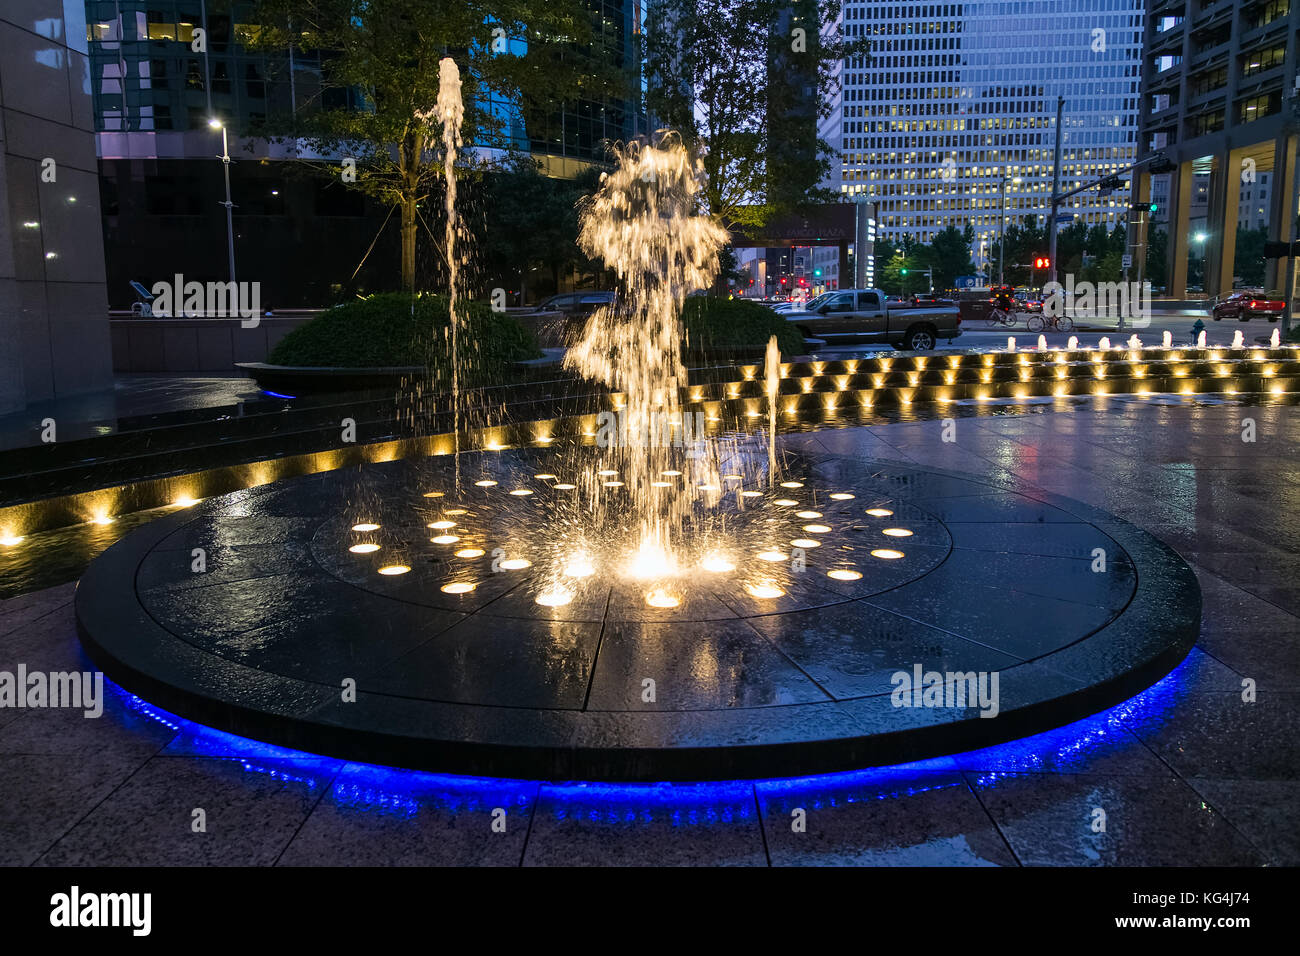 Fountain with lights and illumination in Downtown Houston, Texas Stock Photo